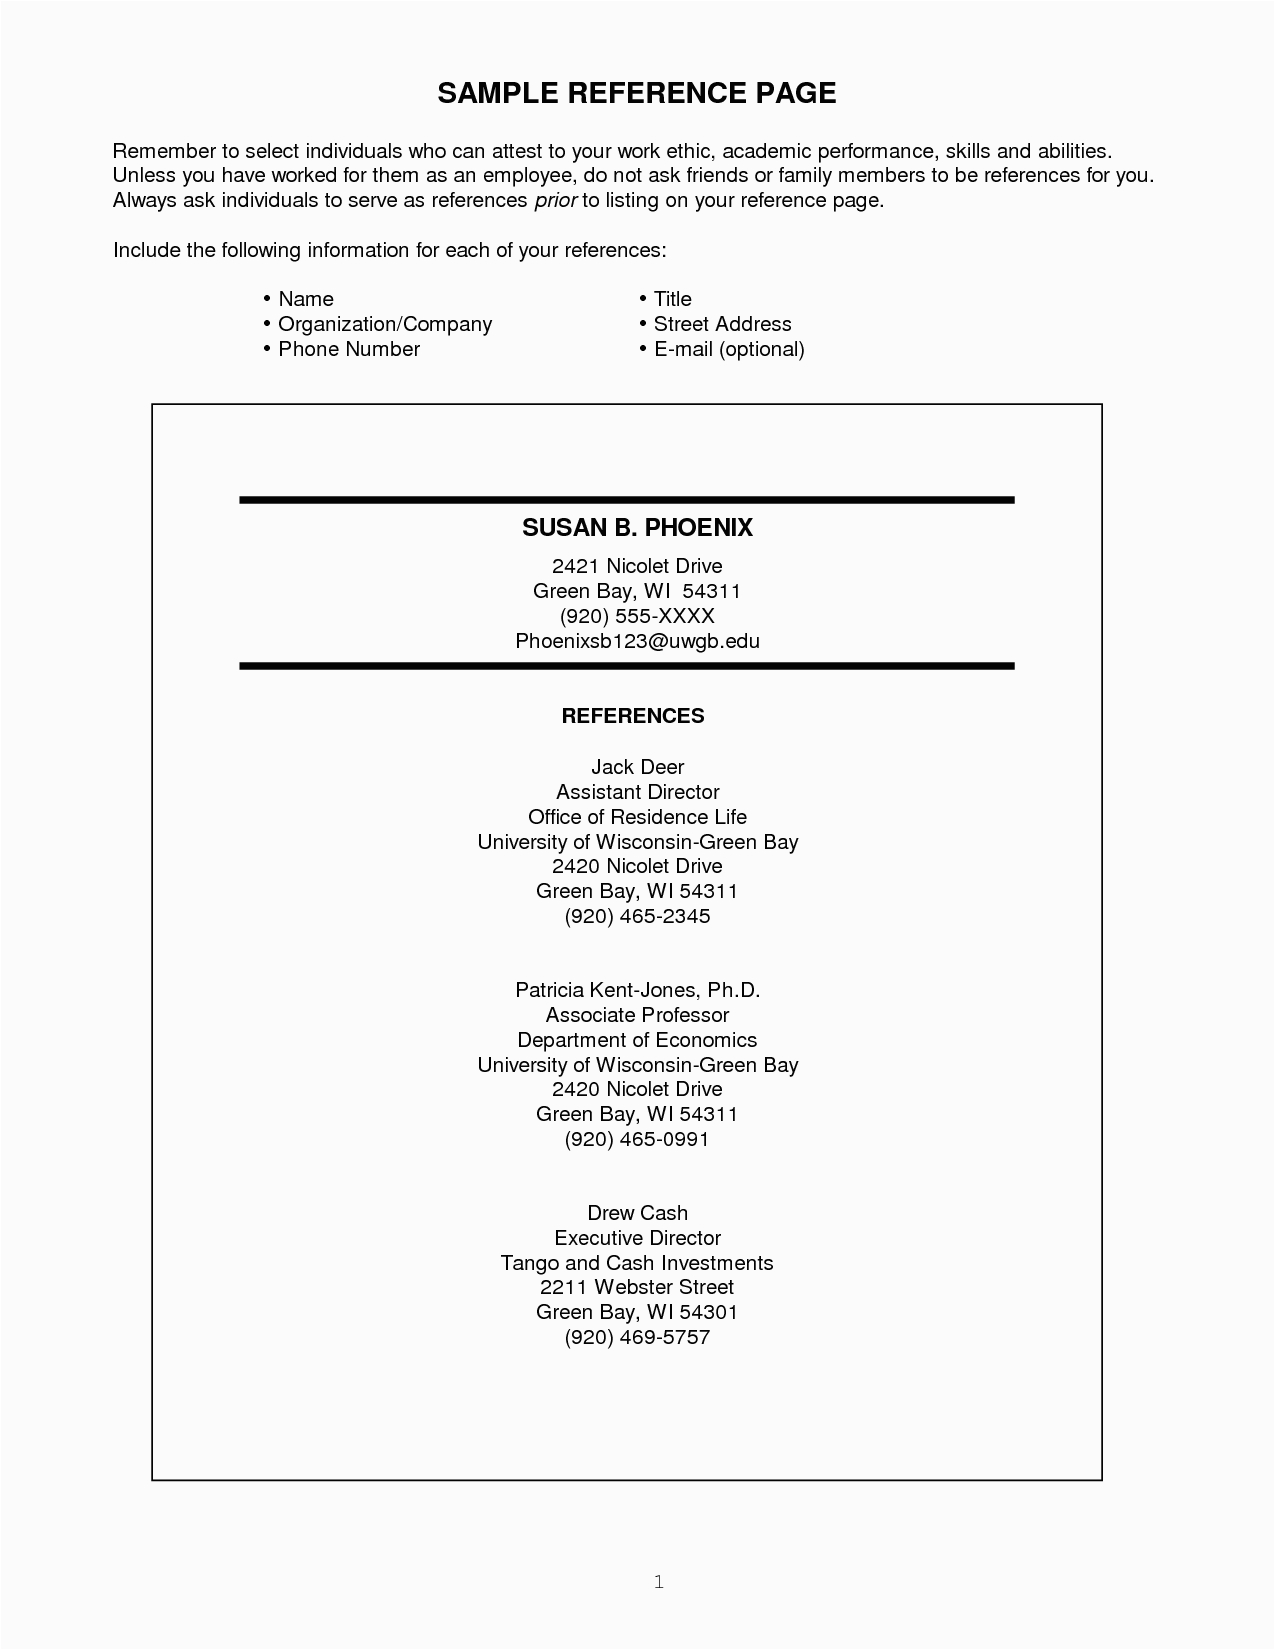 Free Reference List Template for Resume Resume Reference Page – Task List Templates